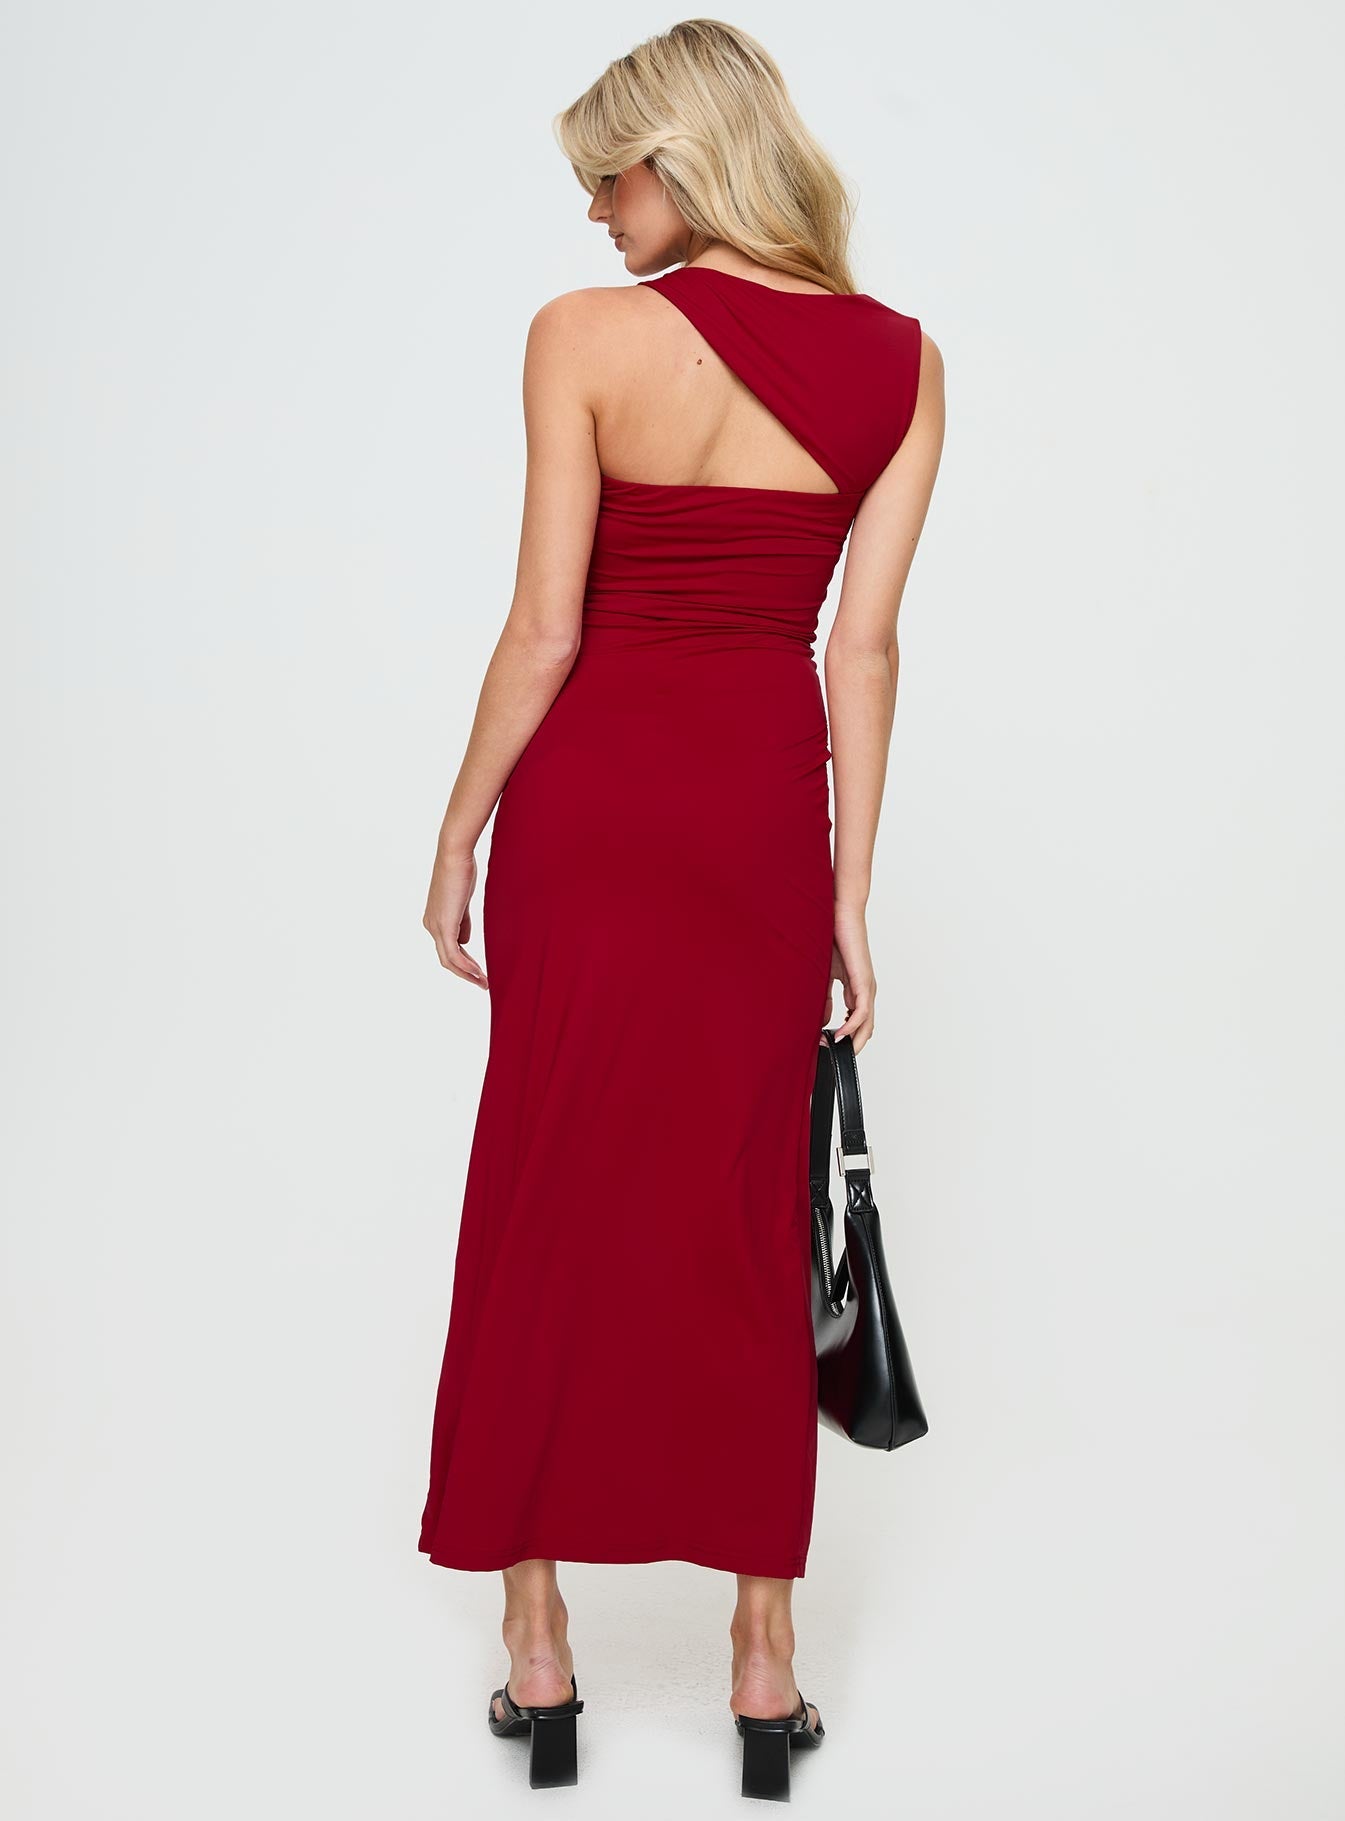 Shop Formal Dress - Smithy Maxi Dress Red featured image